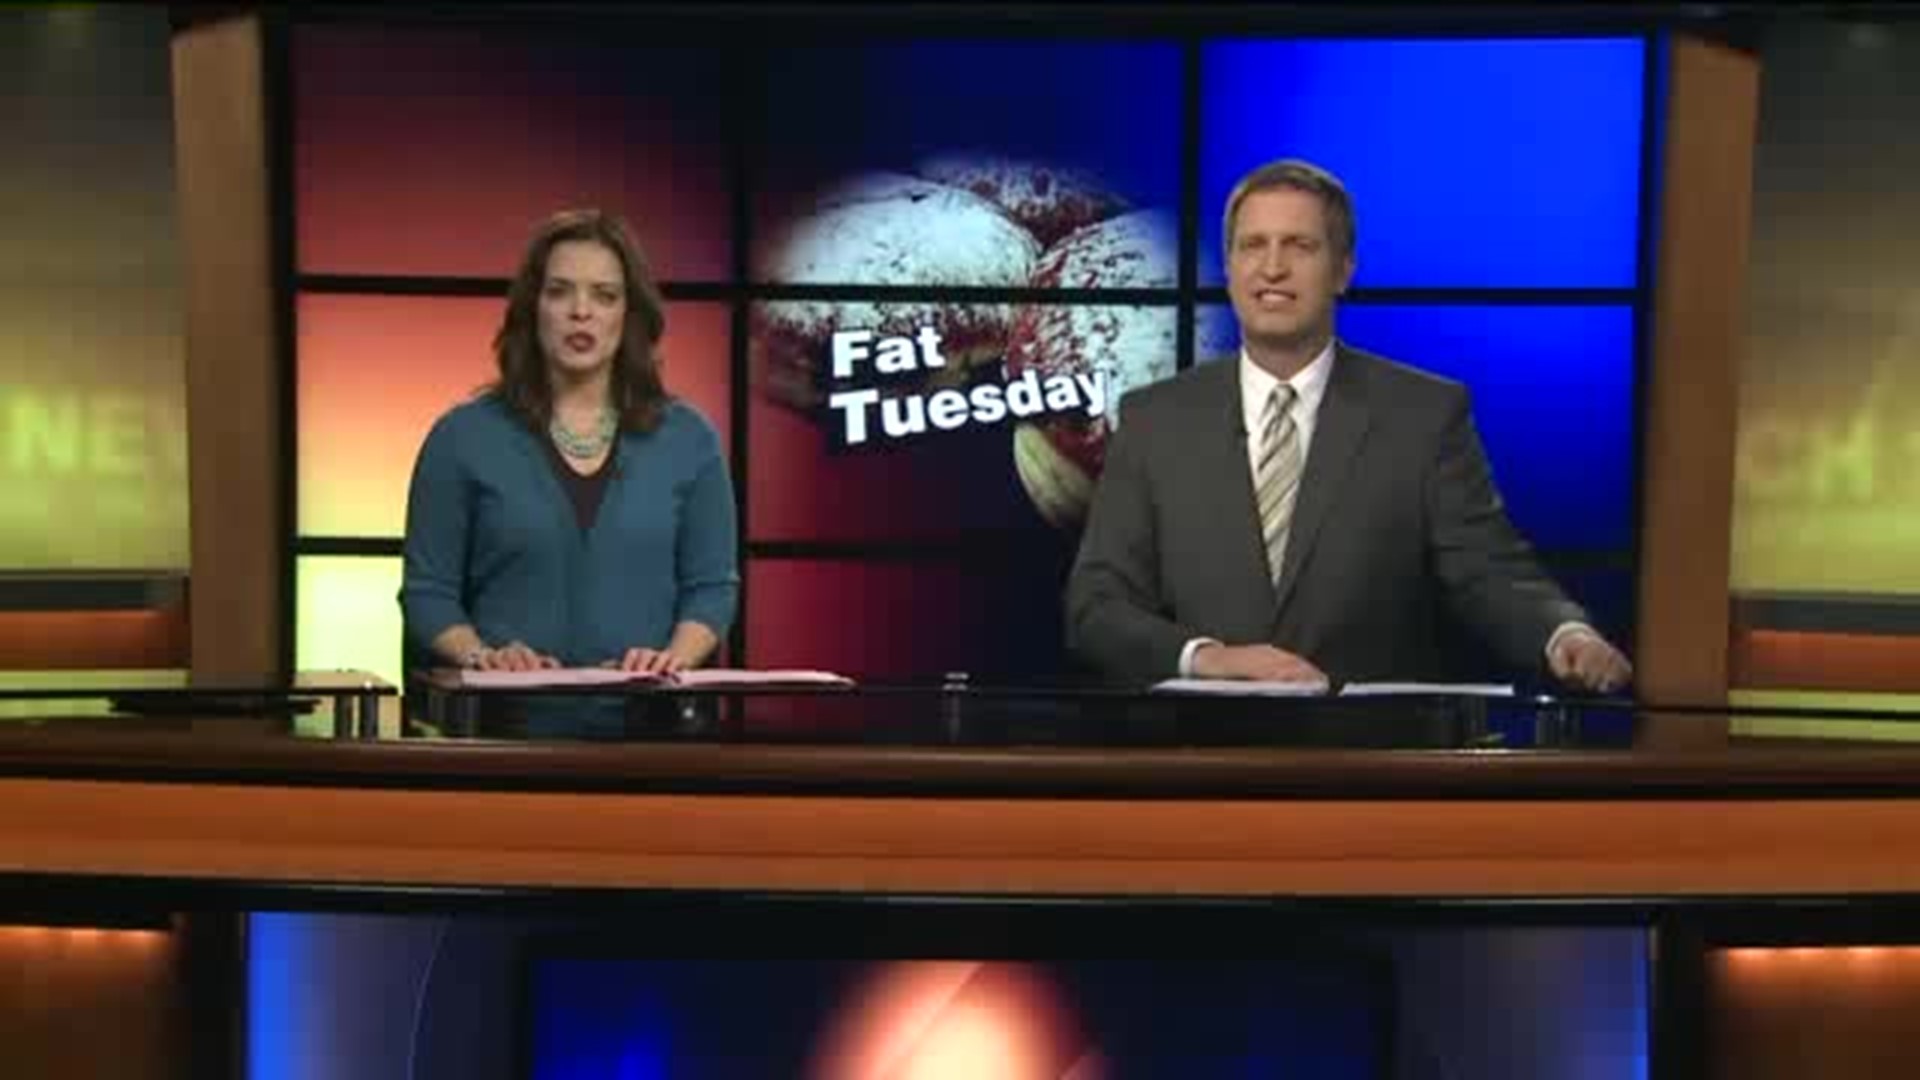 wnep-vid10532-in27738-out31748-0424a4ad-53152338-Video